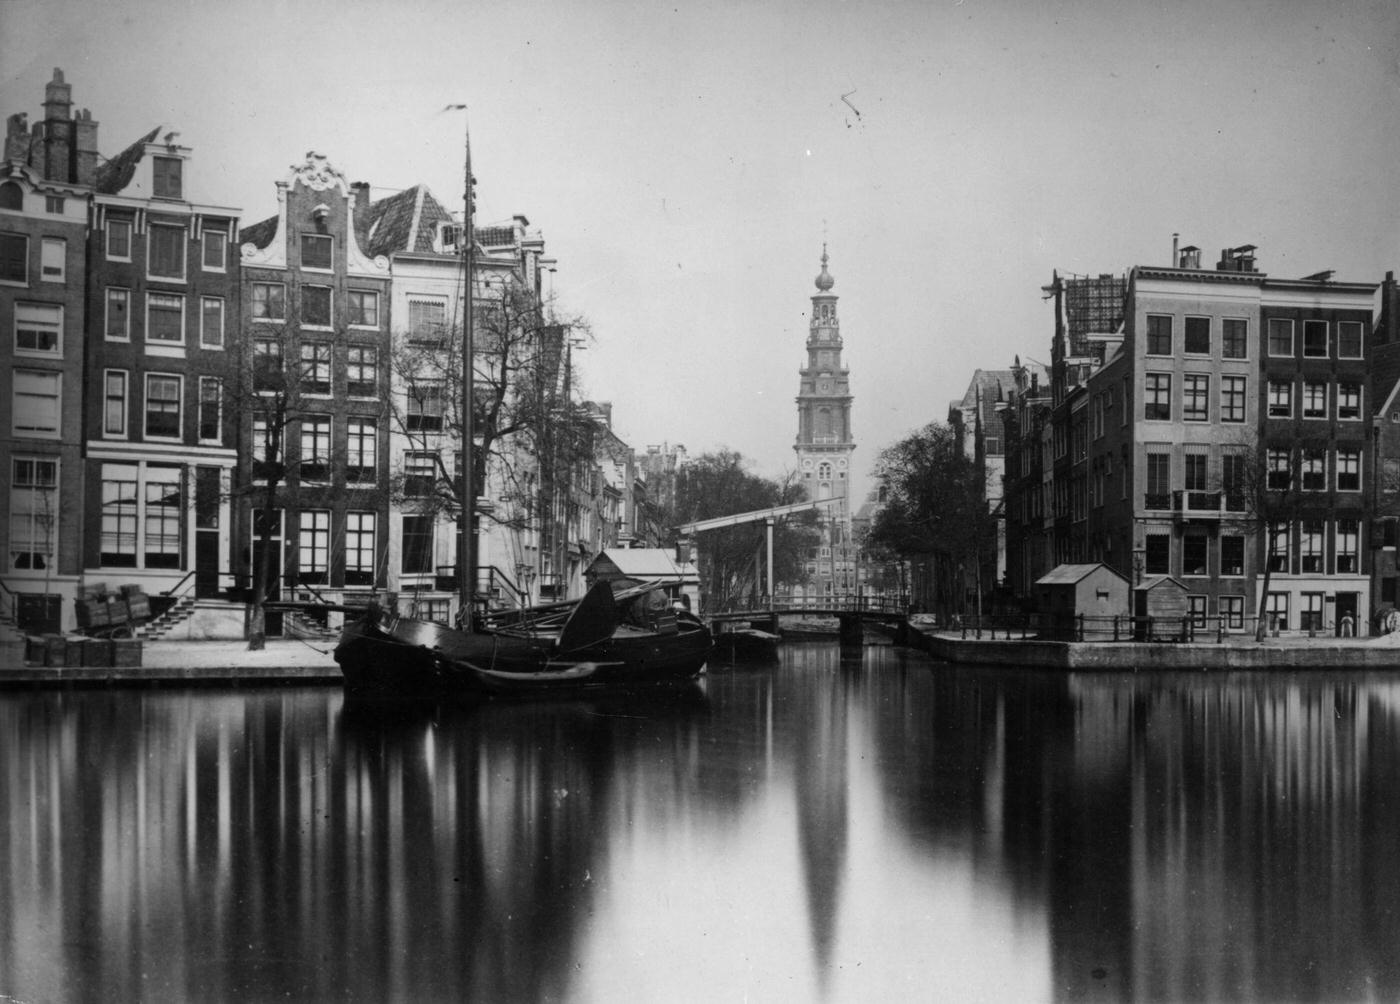 A barge moored alongside a canal in the Dutch city of Amsterdam, 1900